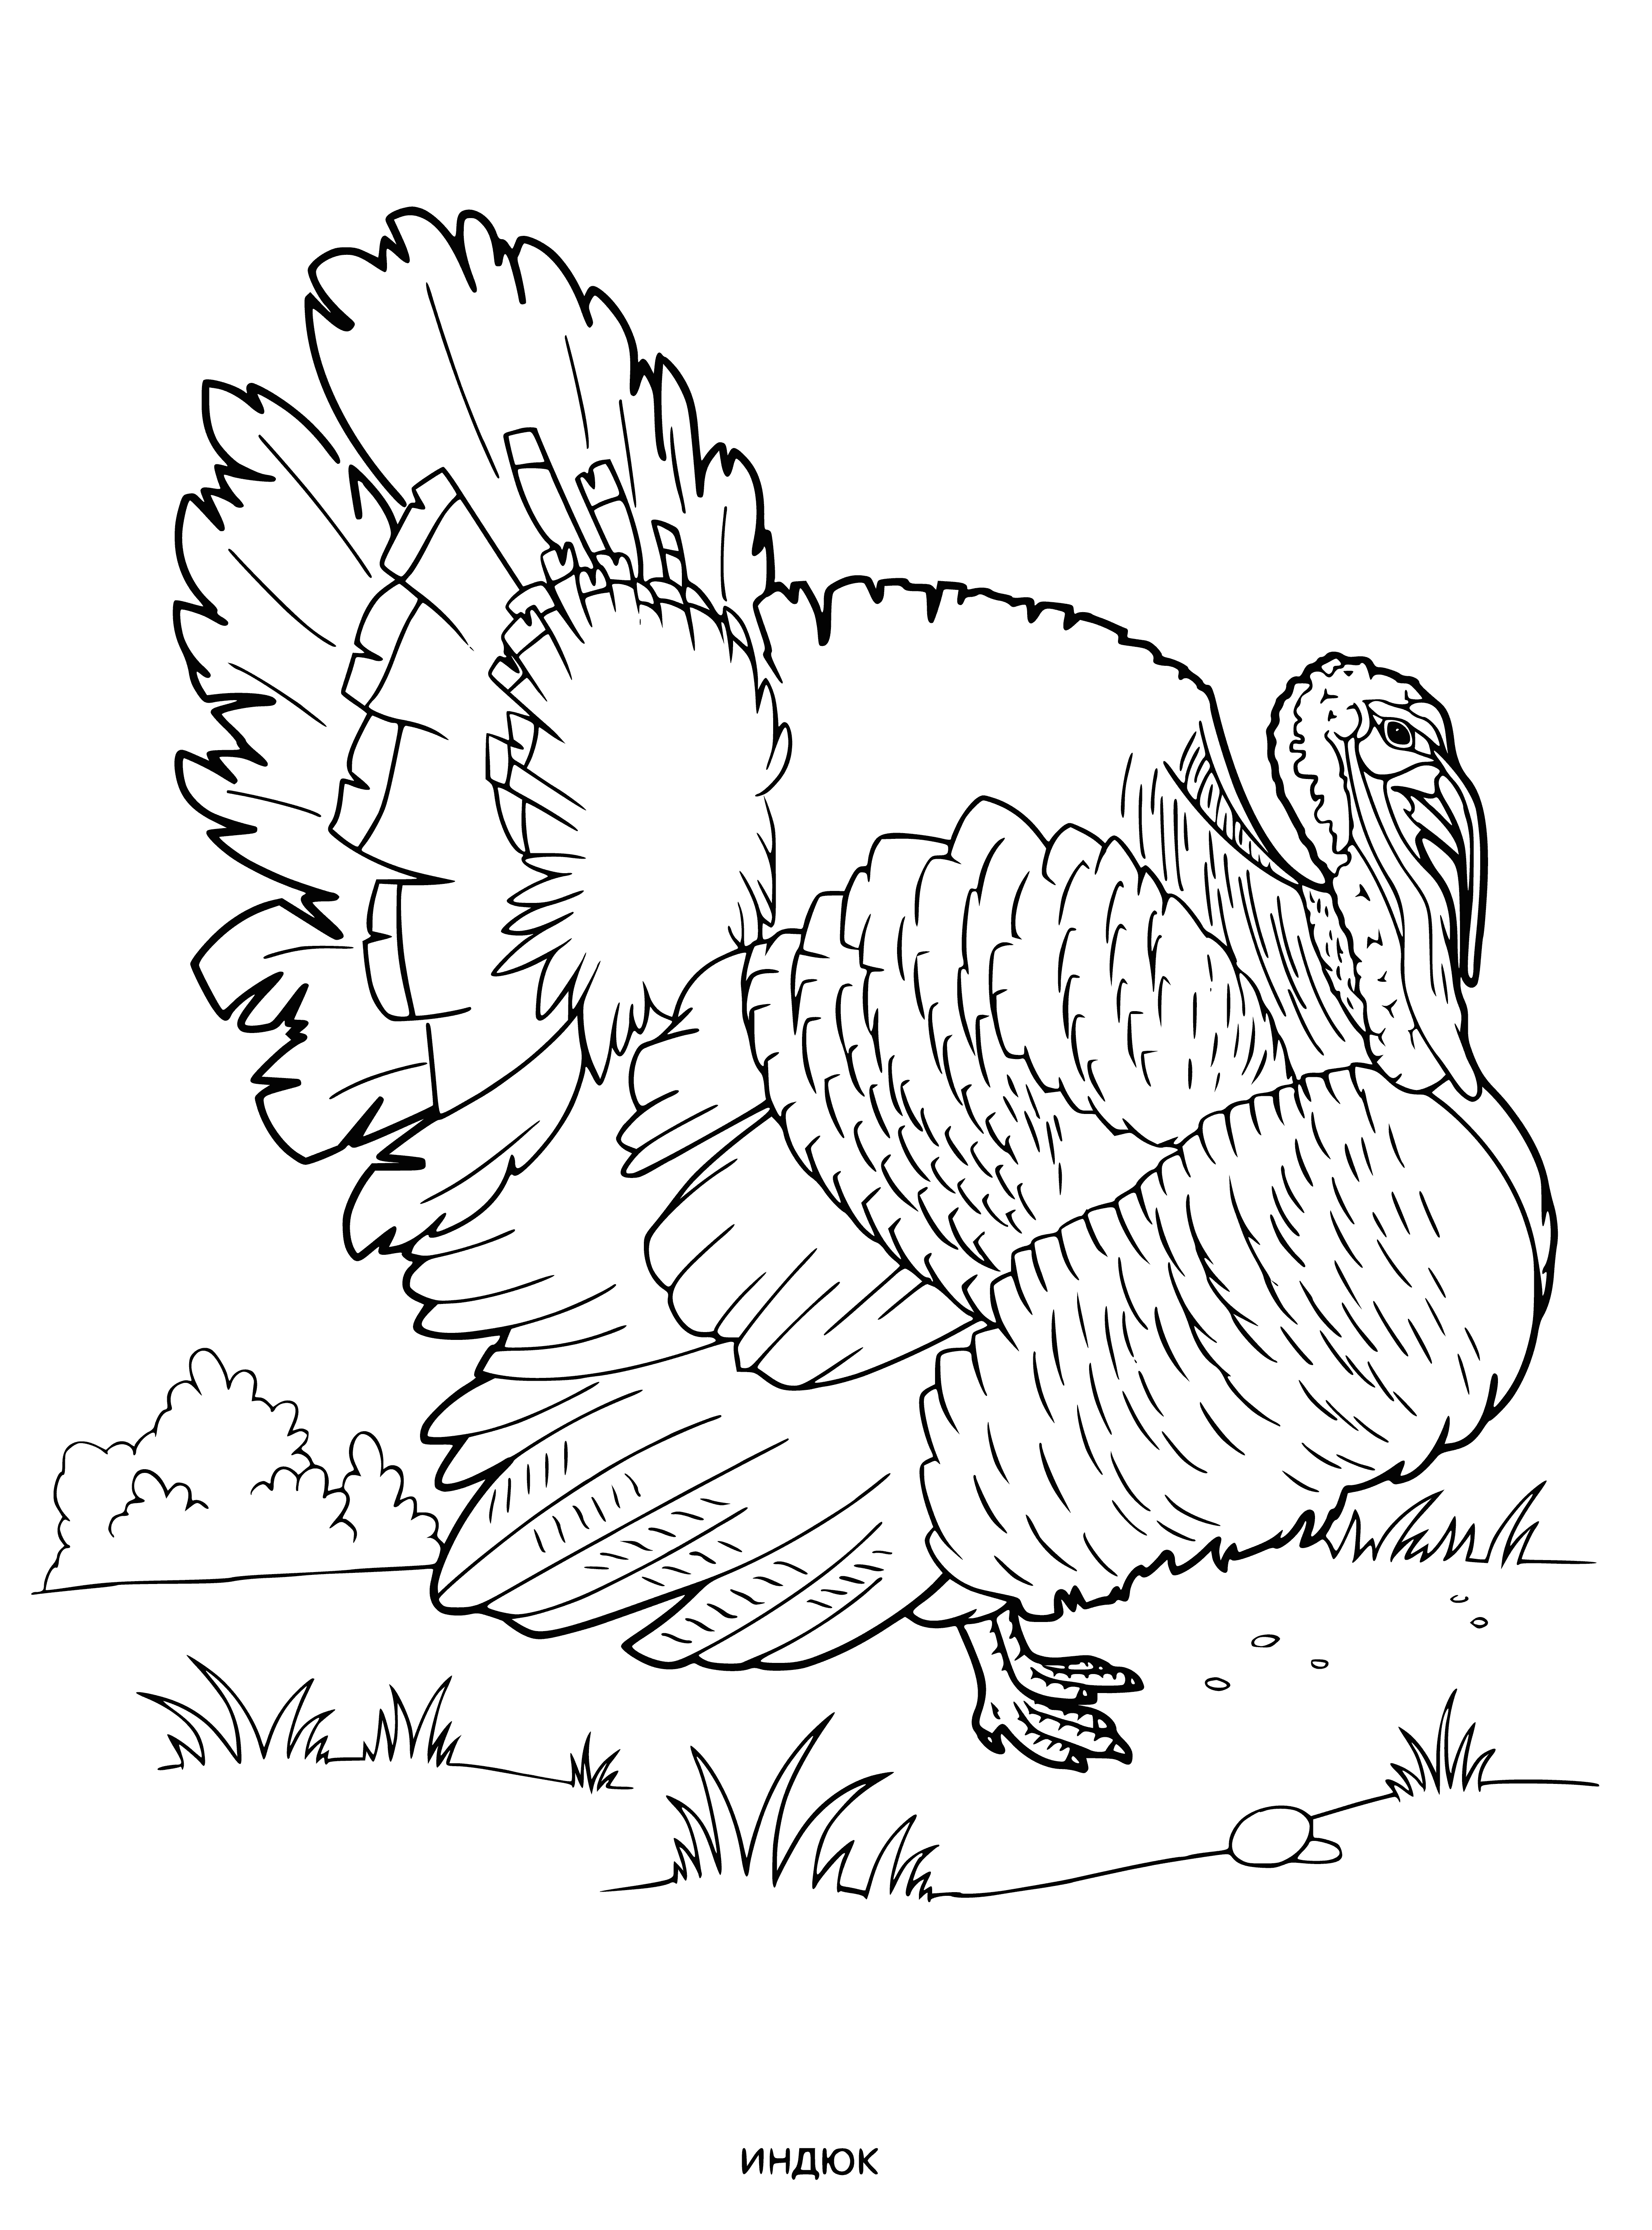 coloring page: Large bird with long neck/tail, dark brown feathers, bare, wrinkled head with red snood, yellow eyes/red rims, large, hooked beak, and strong legs. Surrounded by smaller birds.